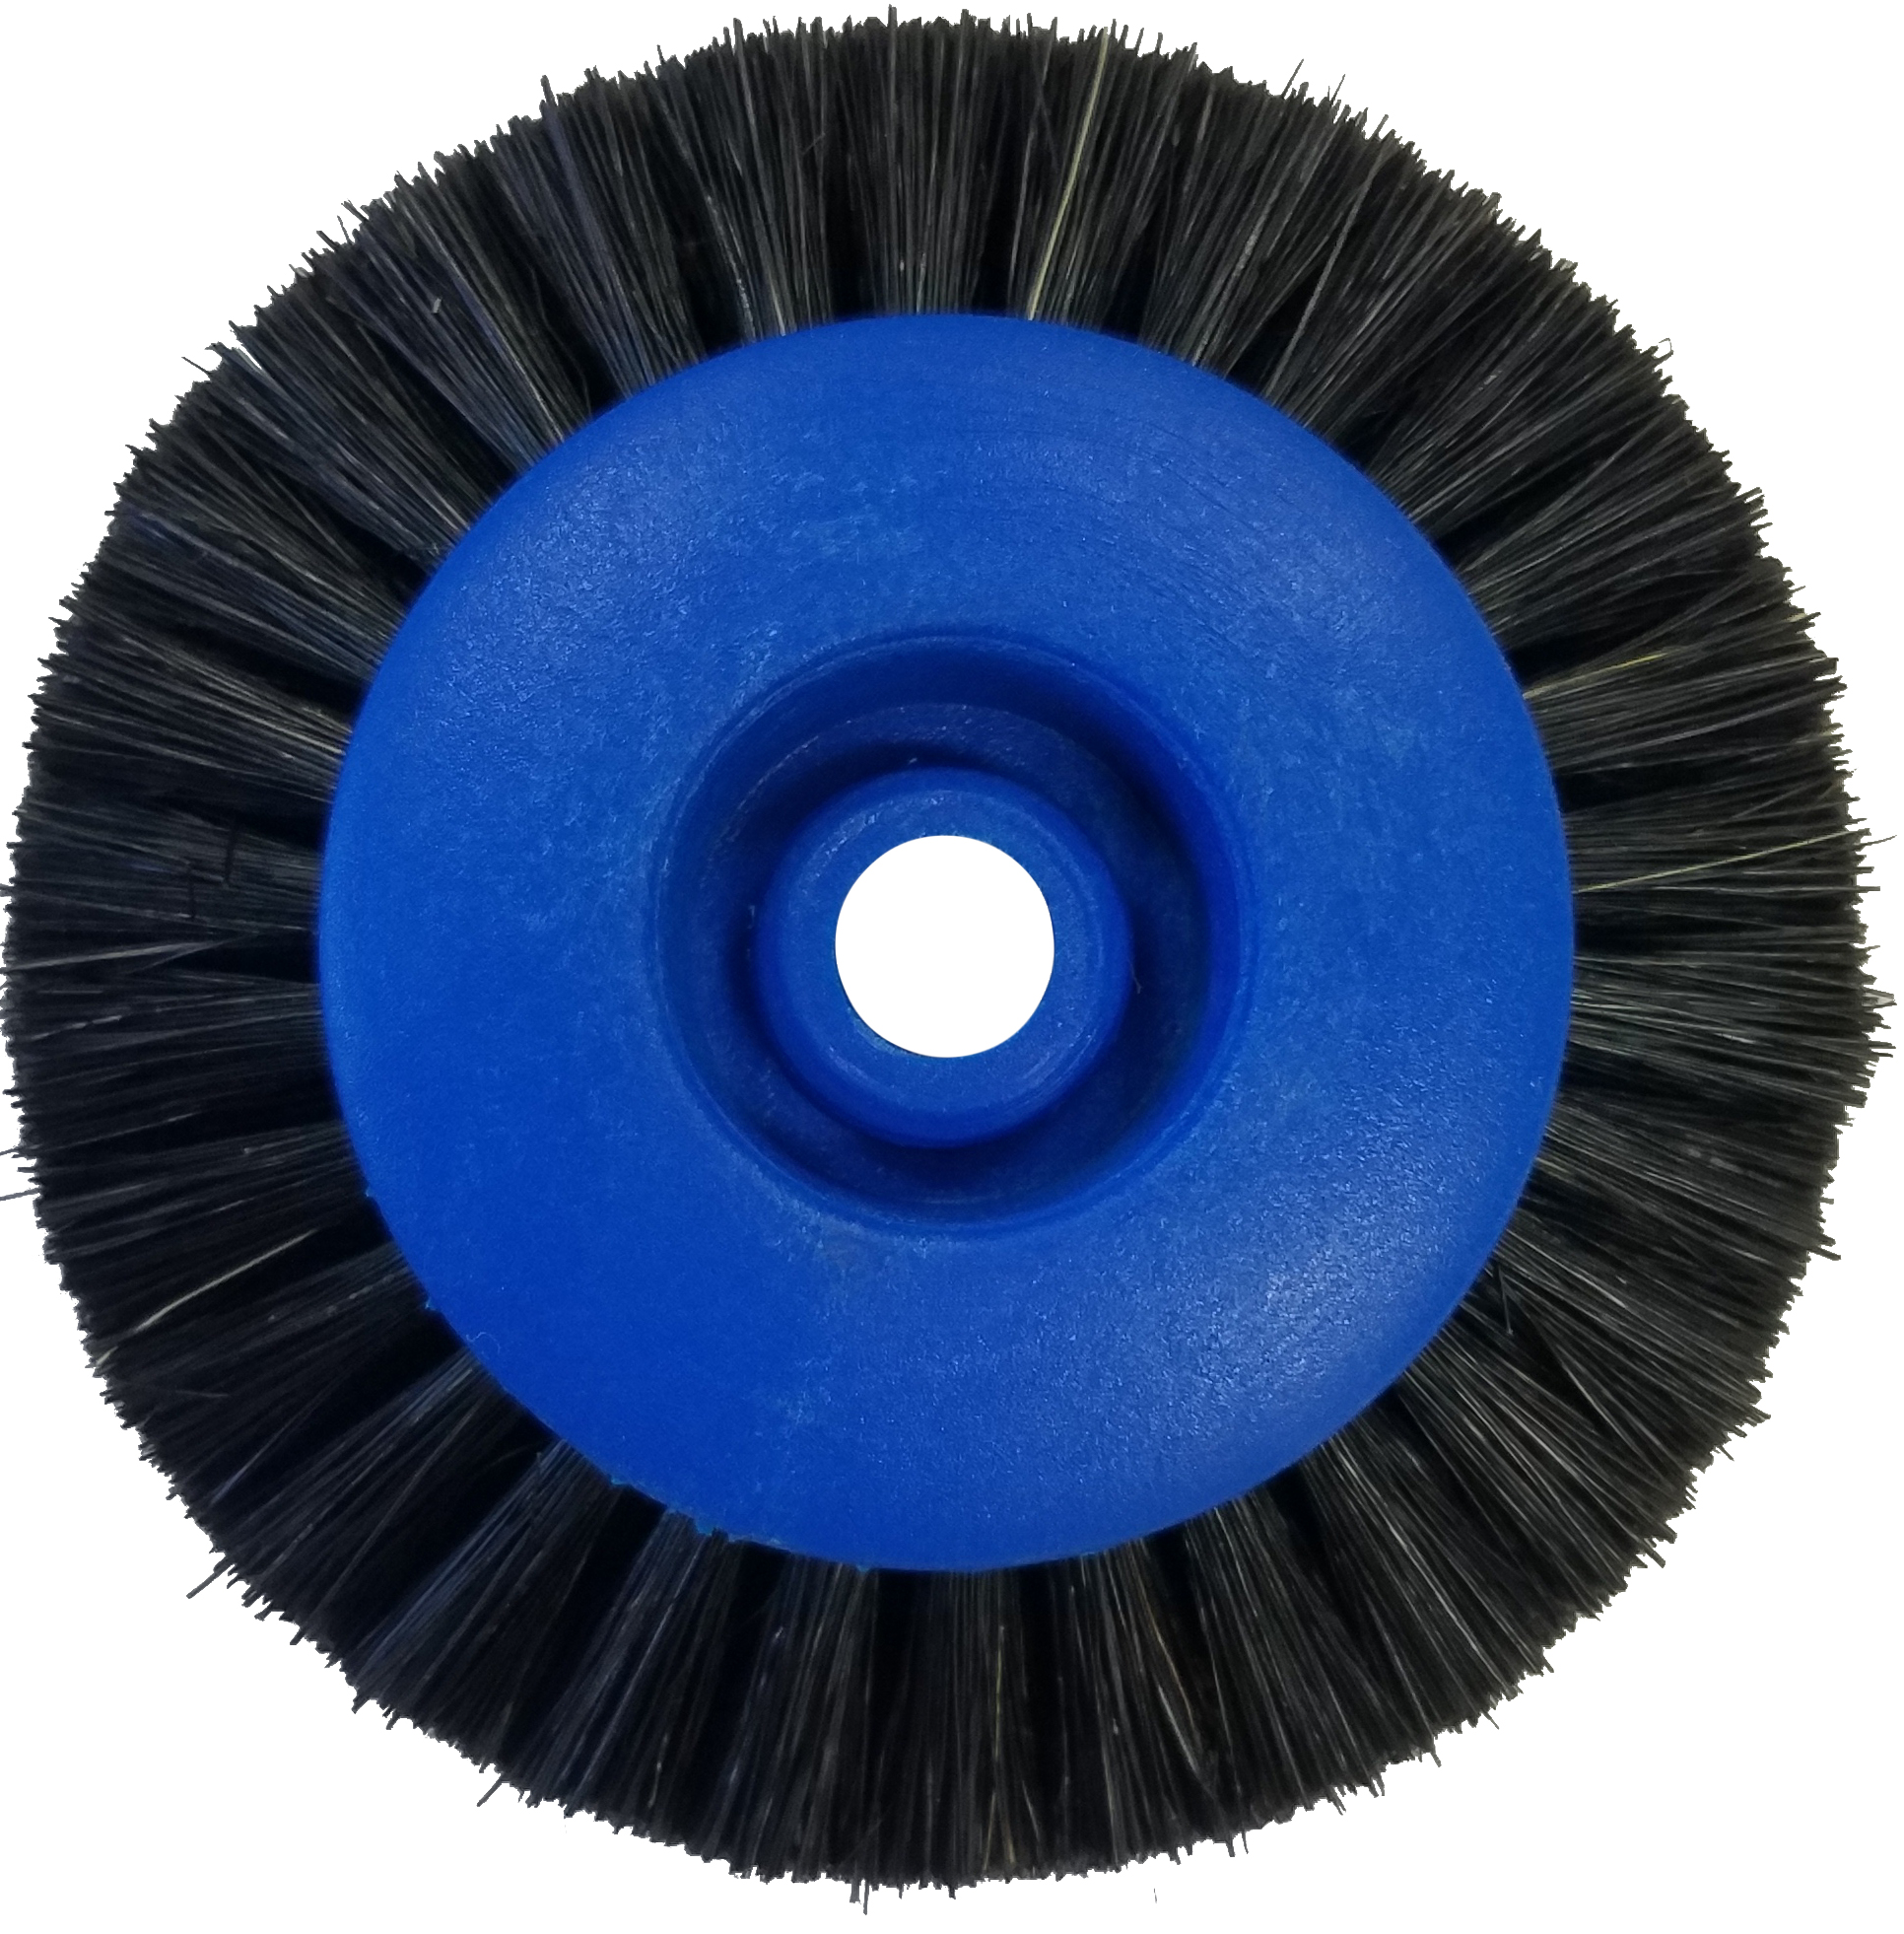 JSP GENUINE PLASTIC HUB CHUNG KING BRUSHES with CONVERGING BRISTLES - Click Image to Close